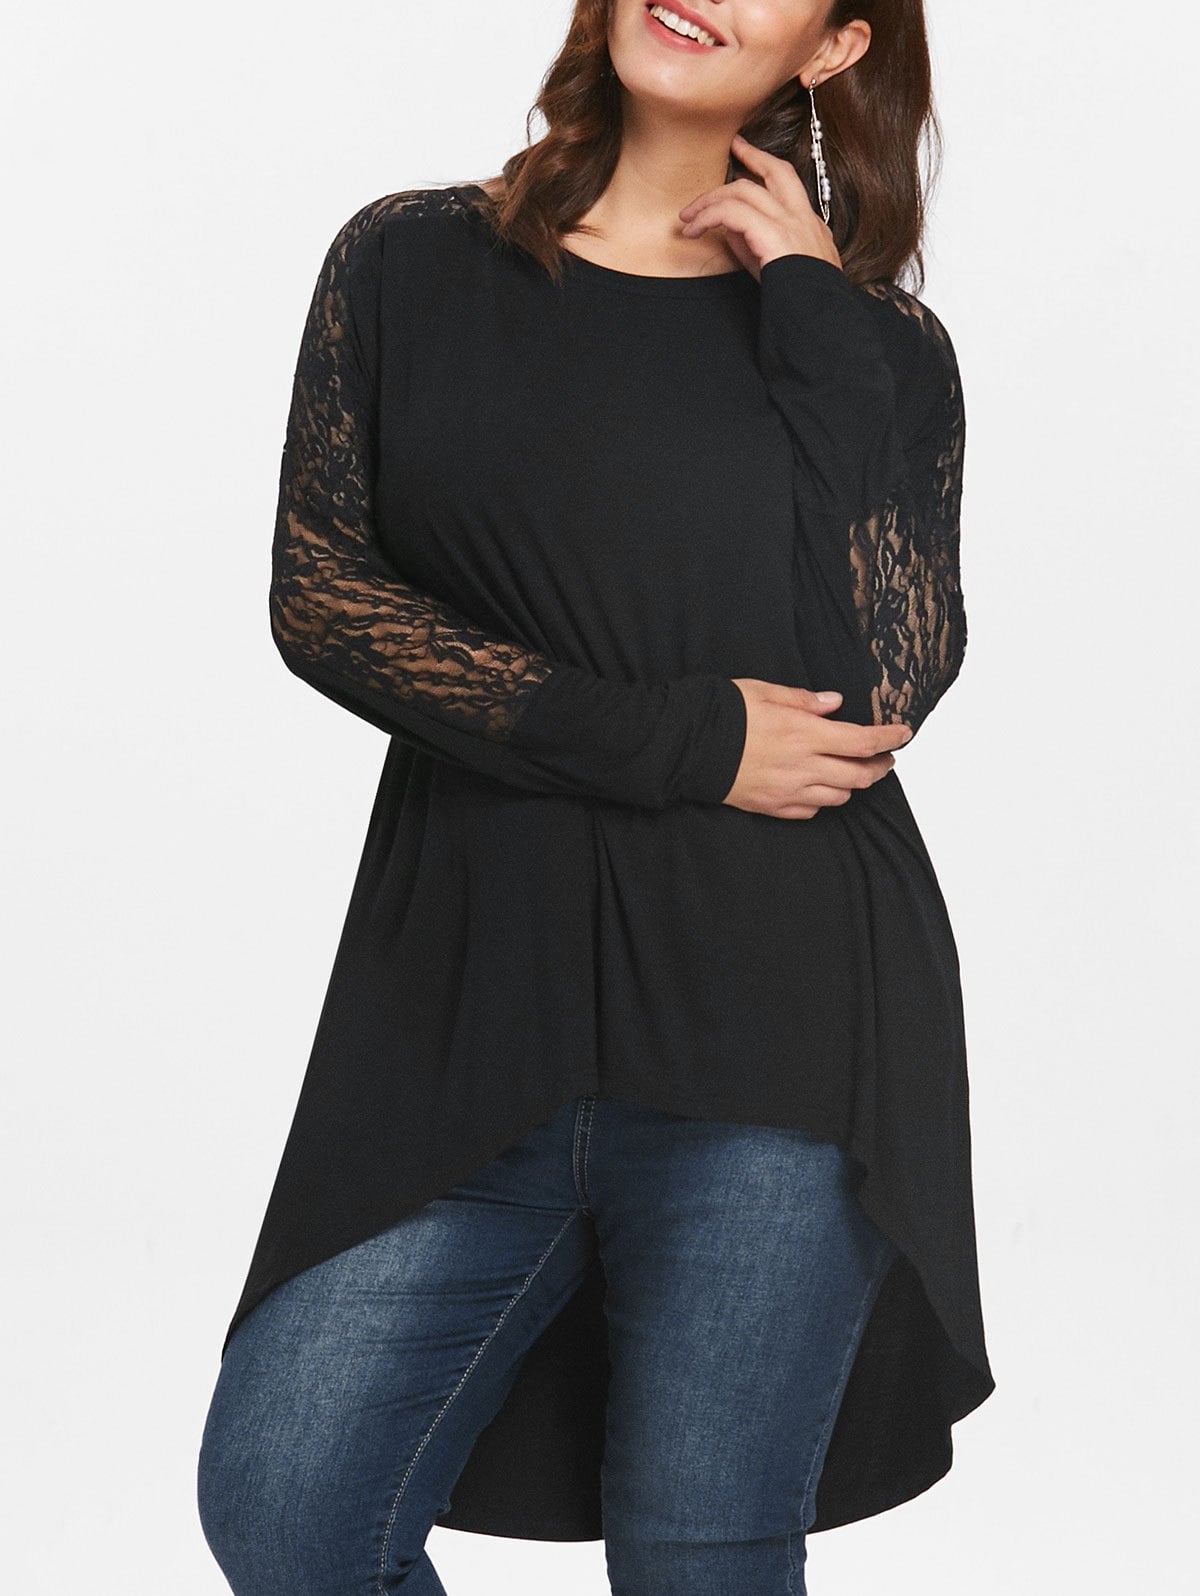 Plus Size Lace High Low T-shirt - Big and Sexy Sportswear